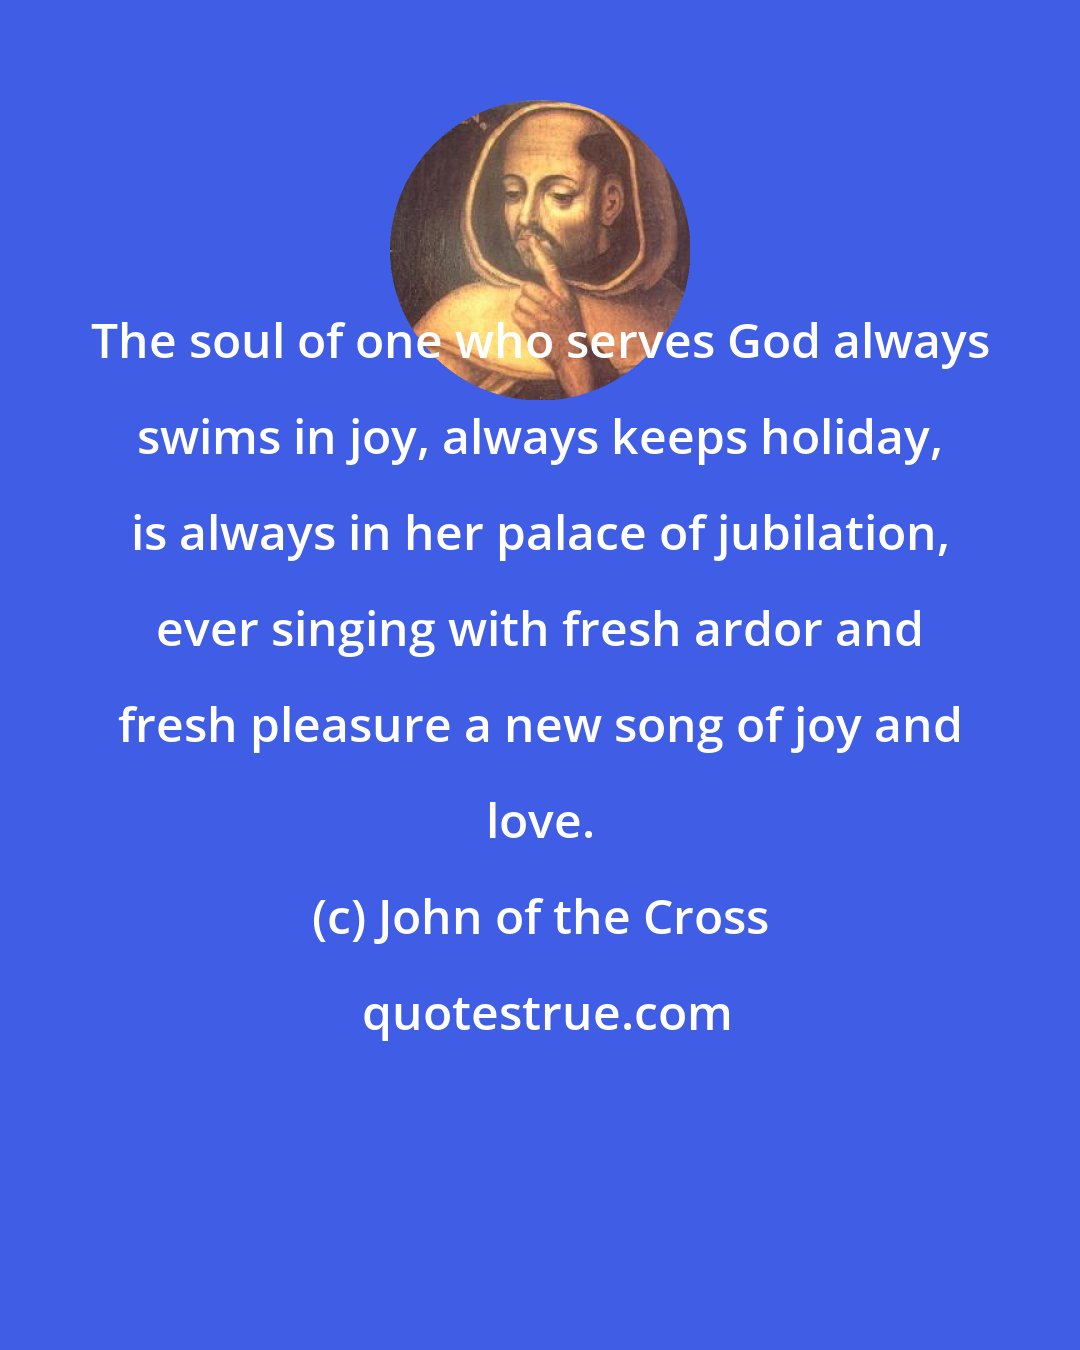 John of the Cross: The soul of one who serves God always swims in joy, always keeps holiday, is always in her palace of jubilation, ever singing with fresh ardor and fresh pleasure a new song of joy and love.